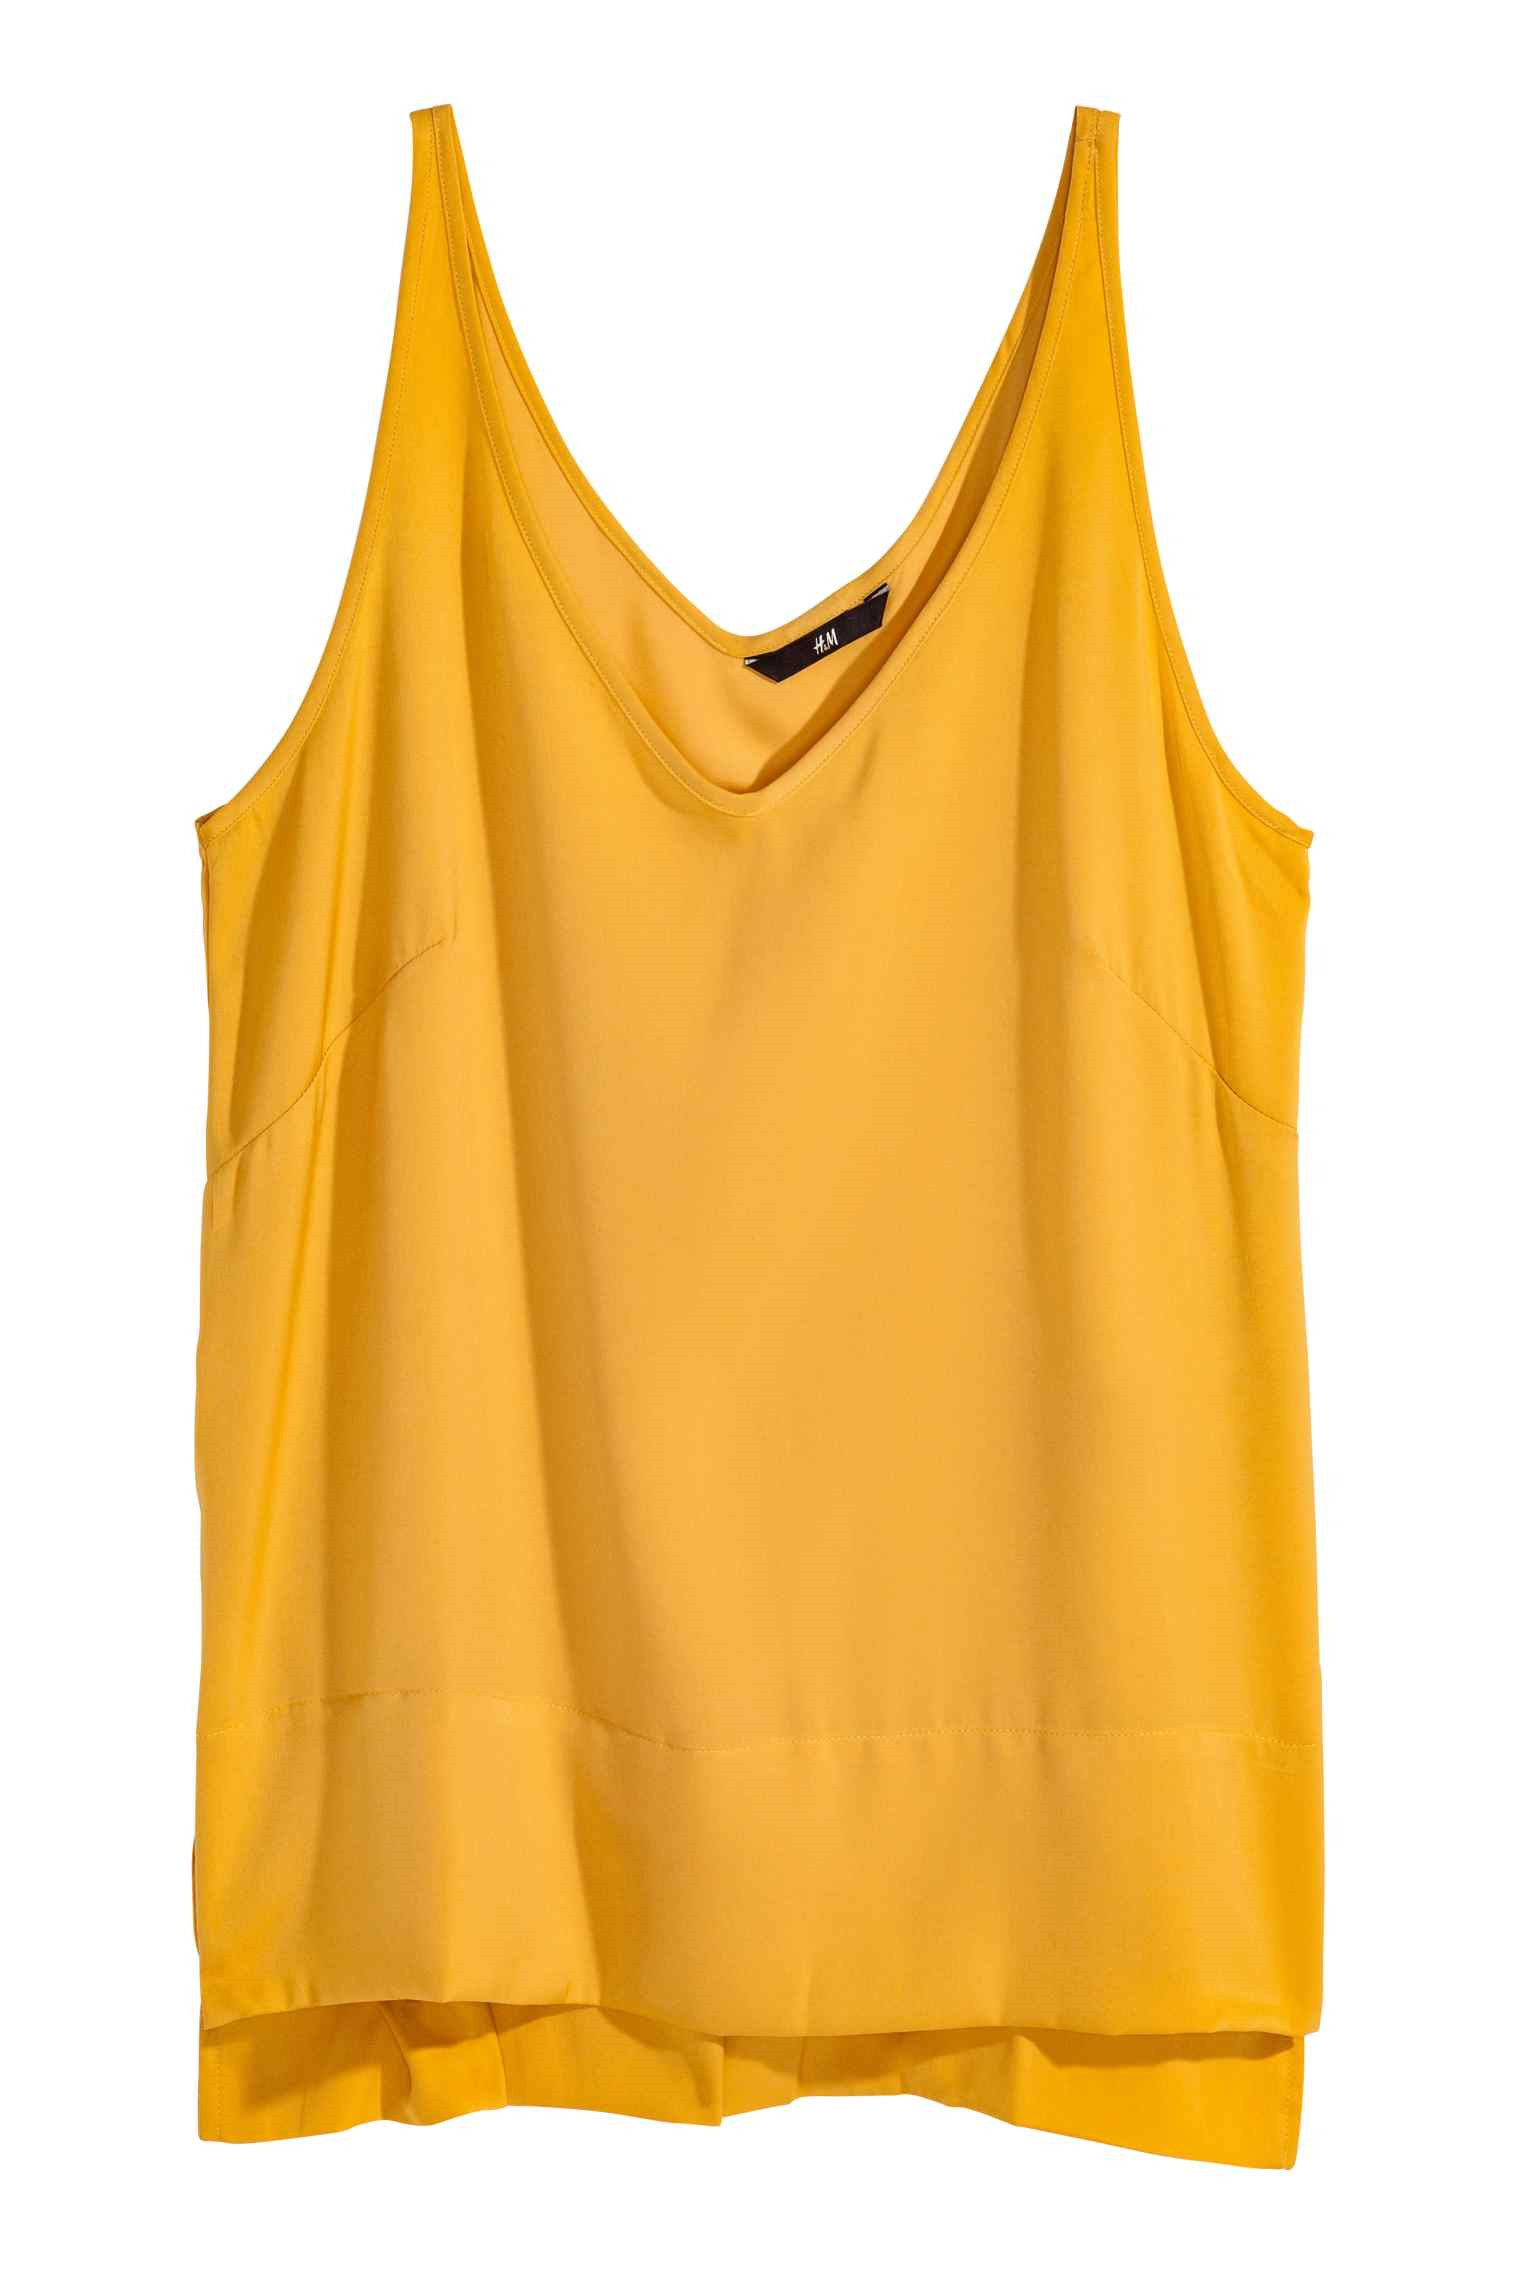 10 yellow must have fashion pieces!